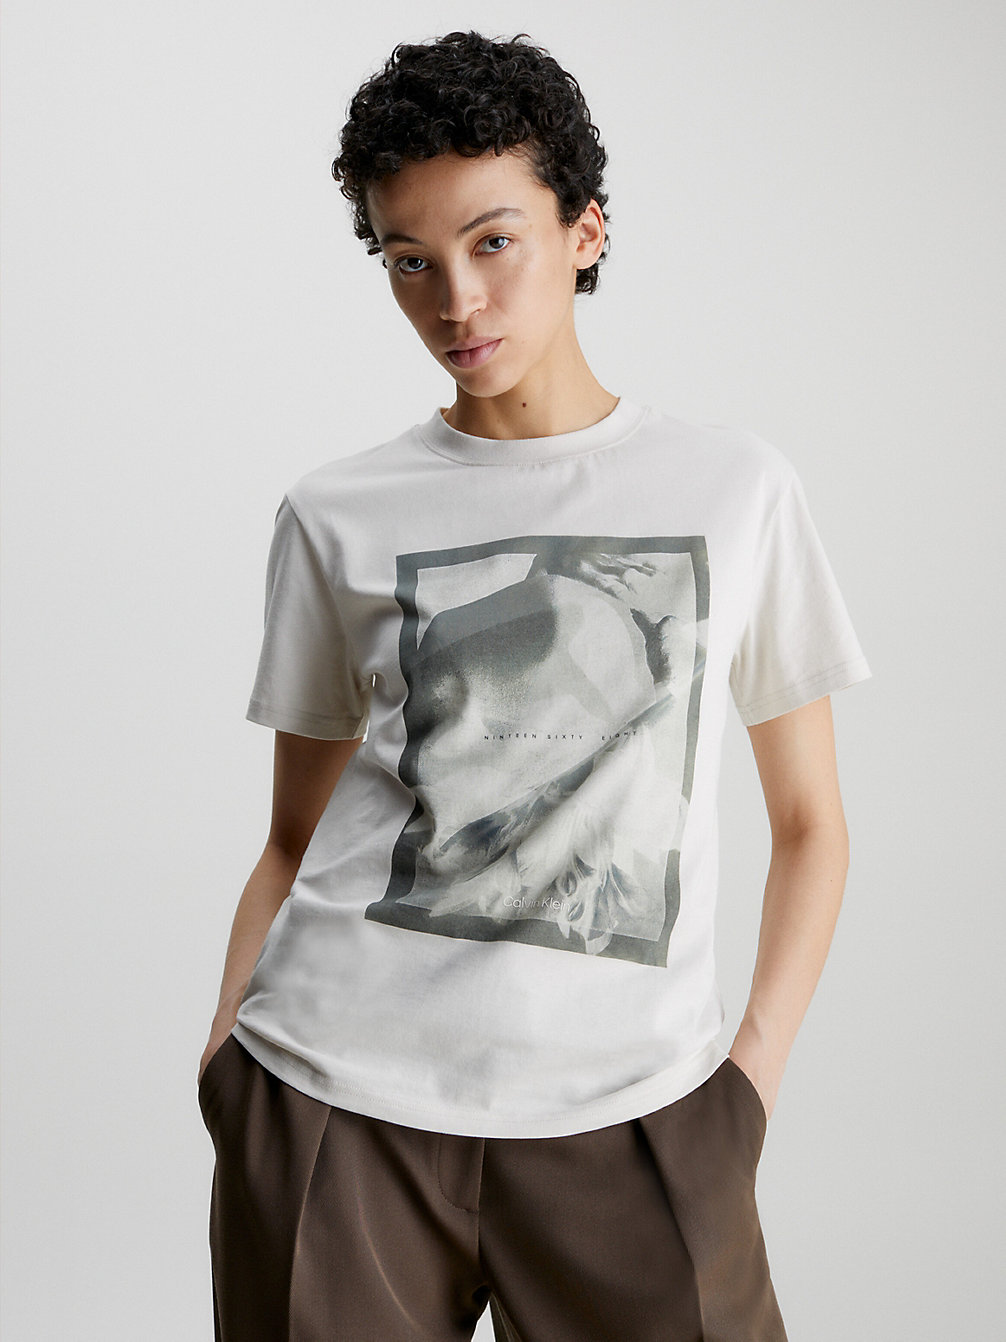 T-Shirt Con Grafica Taglio Relaxed > RAINY DAY > undefined donna > Calvin Klein